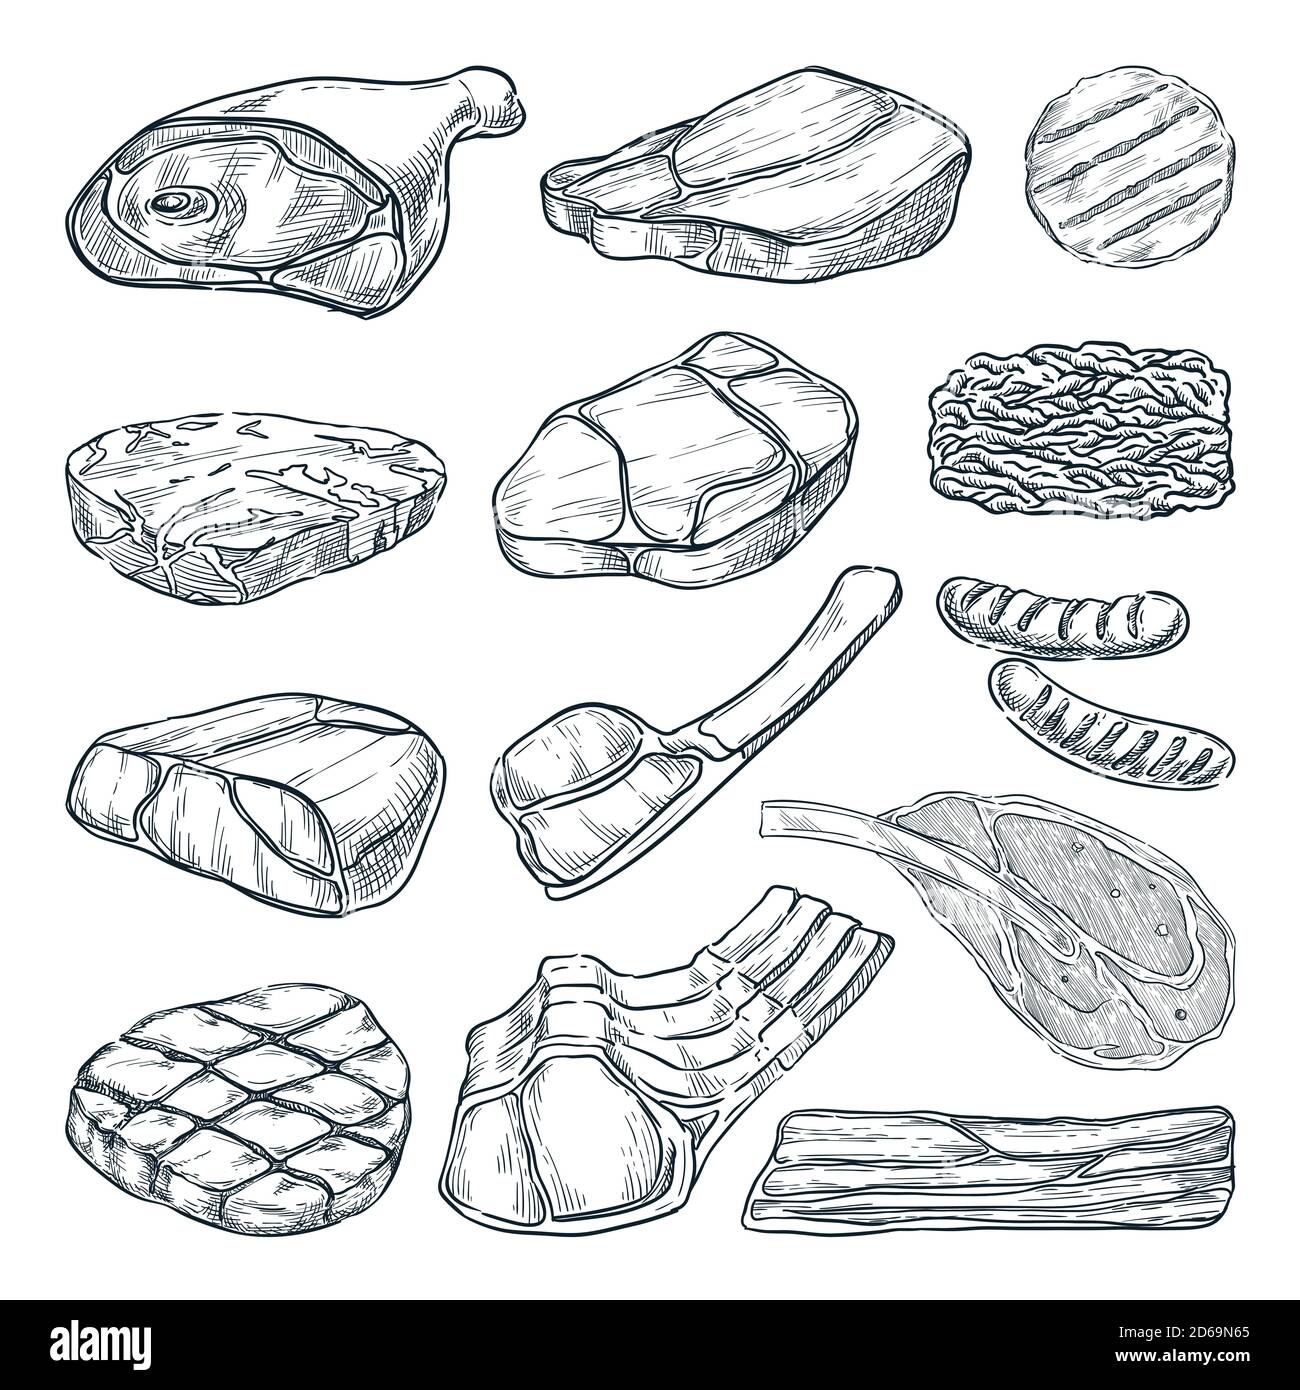 Fresh raw meat collection, sketch vector illustration. Hand drawn food isolated design elements. Pieces of beef steak, ham, pork fillet, lamb chops. Stock Vector